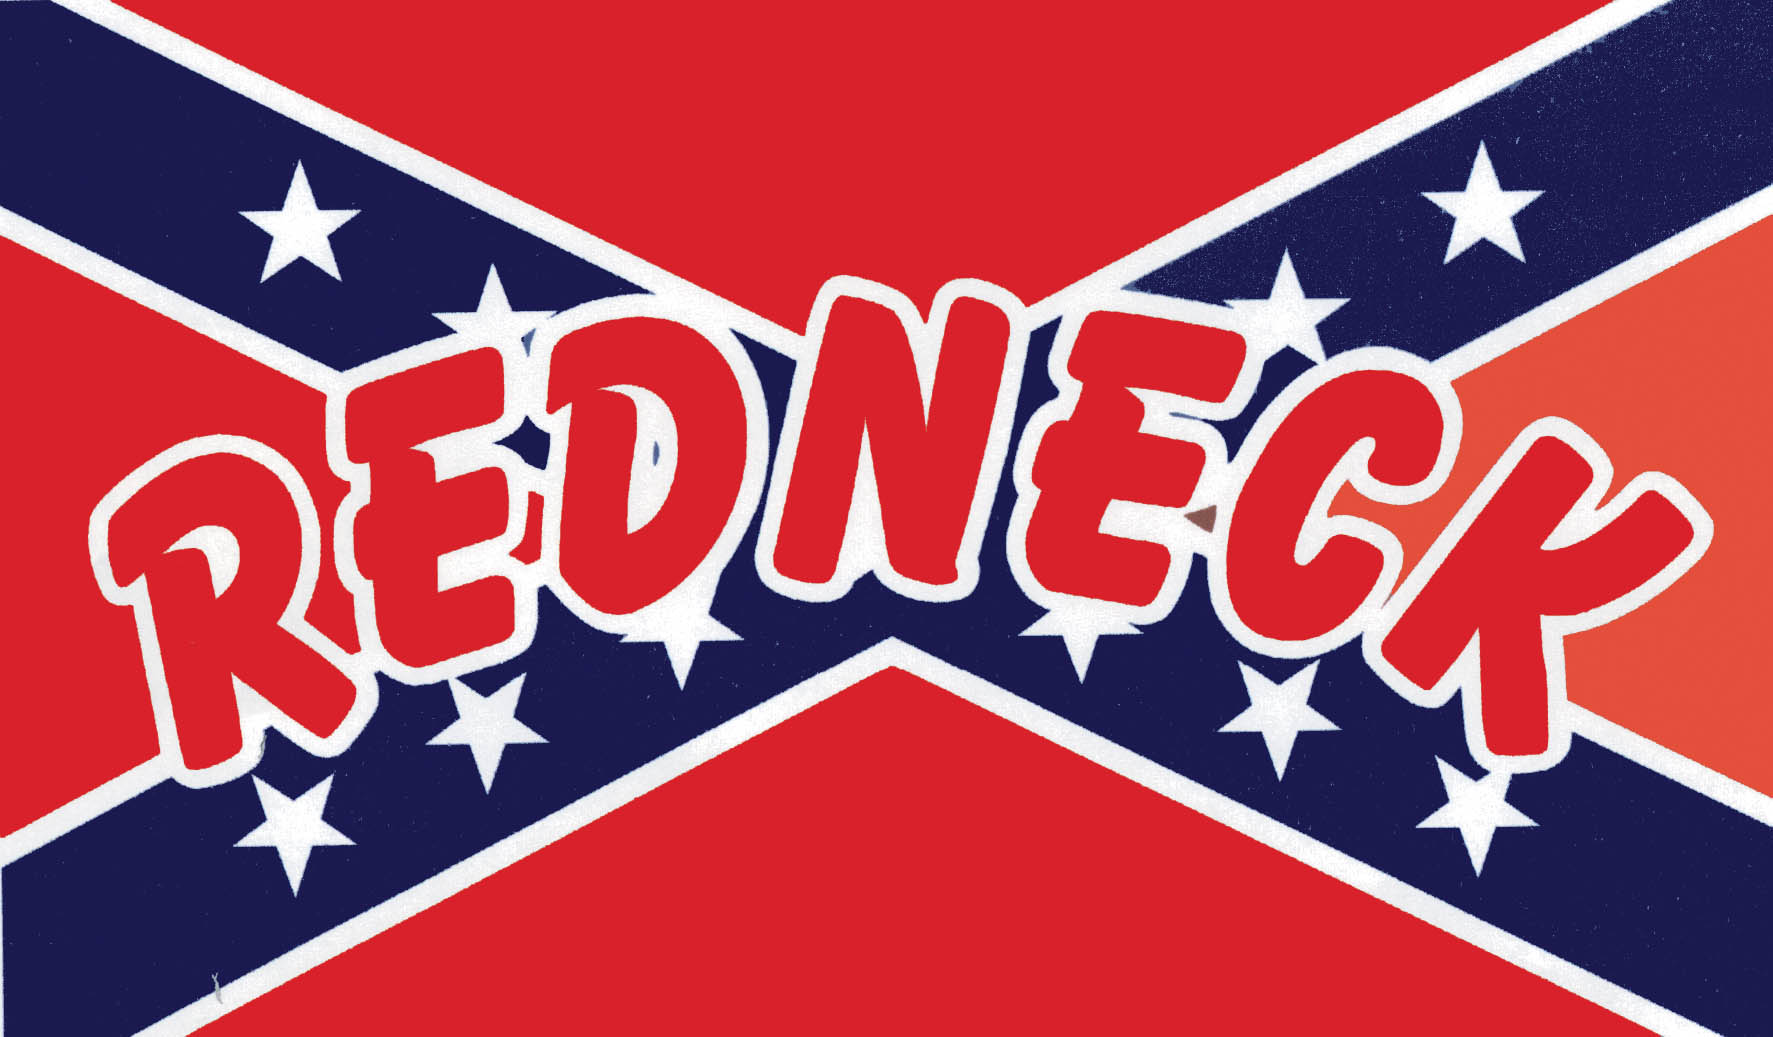 Redneck Flag Meaning Confederate